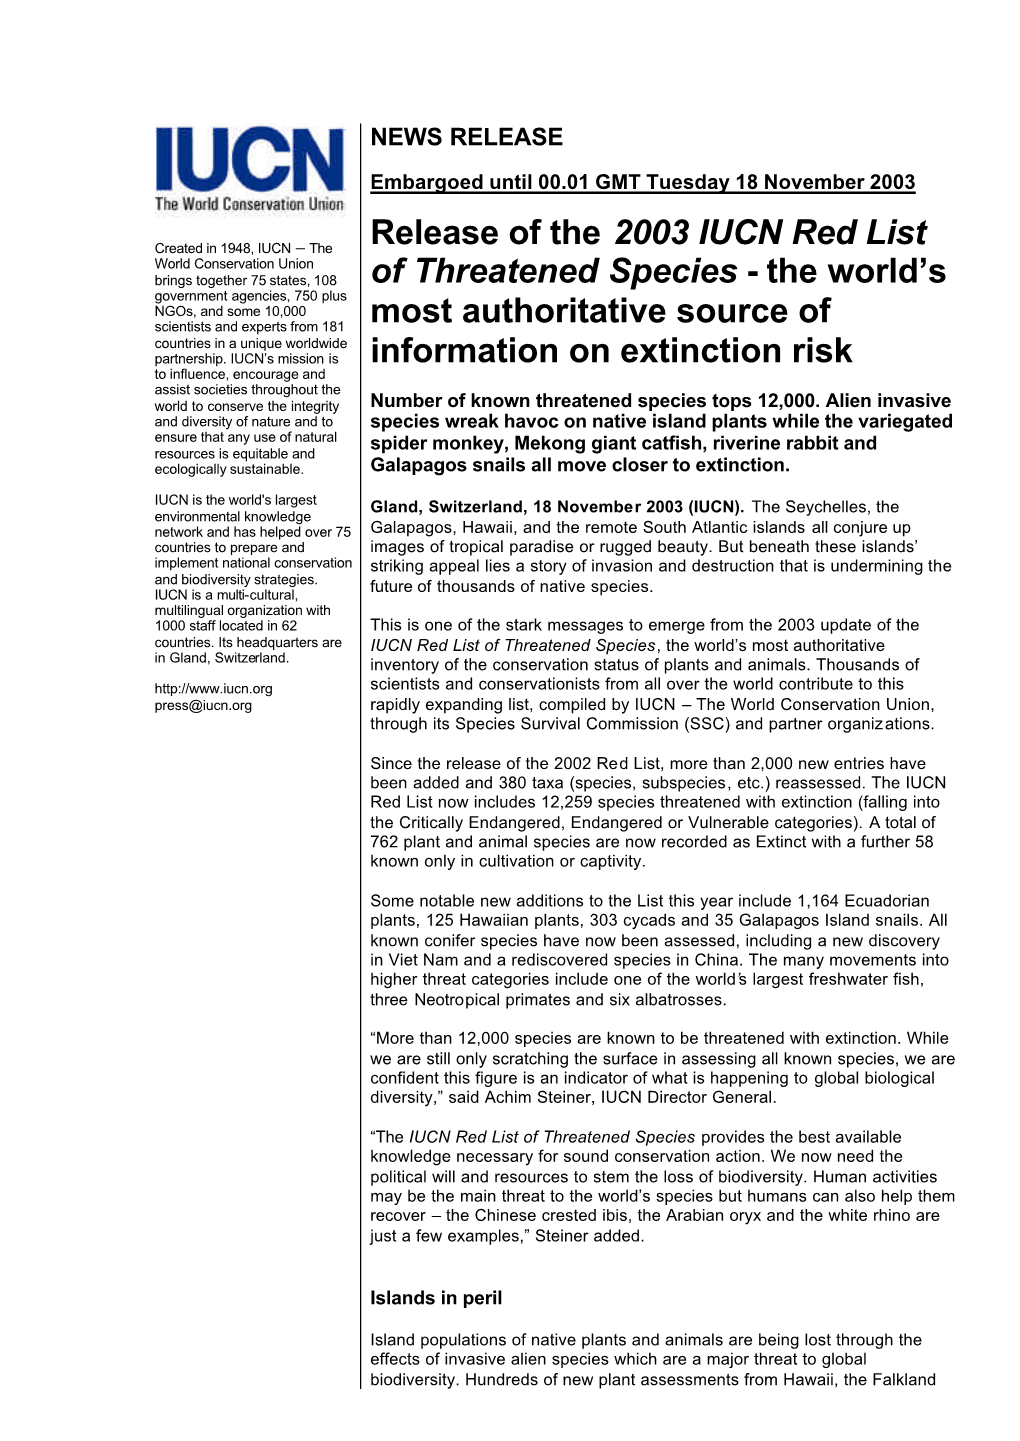 Release of the 2003 IUCN Red List of Threatened Species